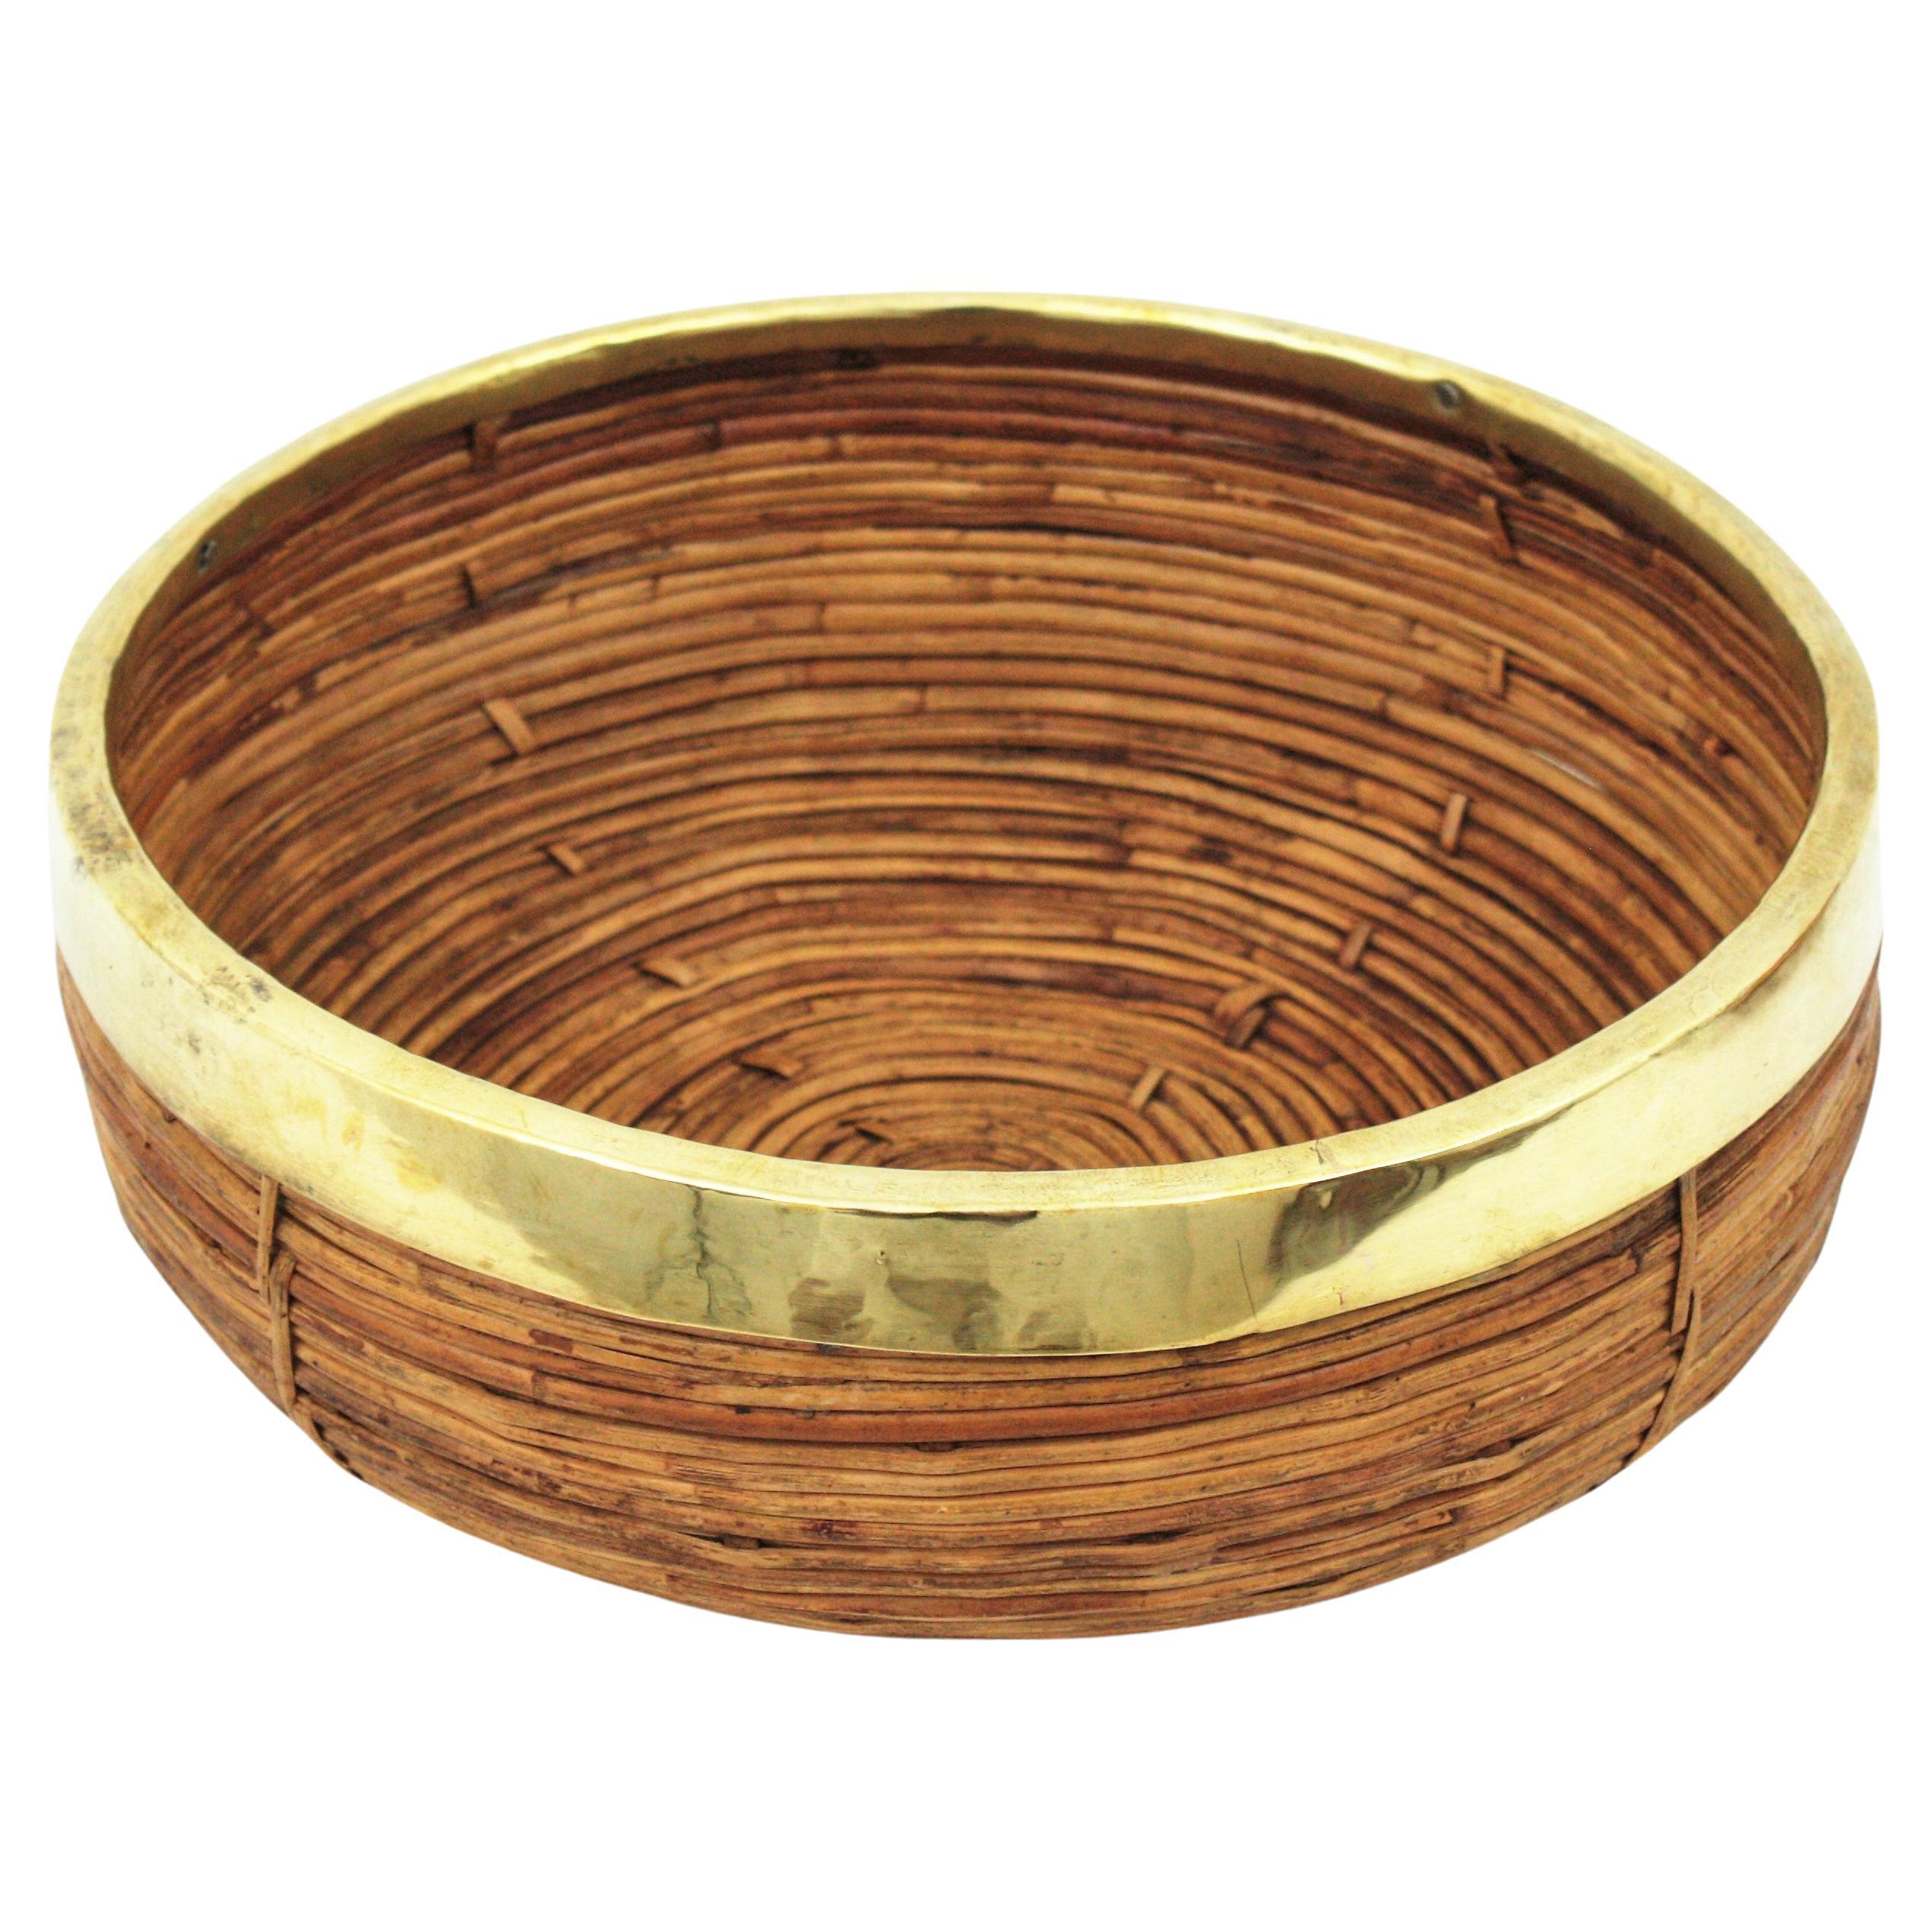 Mid-Century Modern brass and bamboo / rattan large round bowl, centerpiece or basket.
It has a brass trim covering the top.
Handcrafted in Italy, 1970s. 
Use it as fruit bowl or centerpiece to add a stylish Midcentury accent in a kitchen. Perfect to